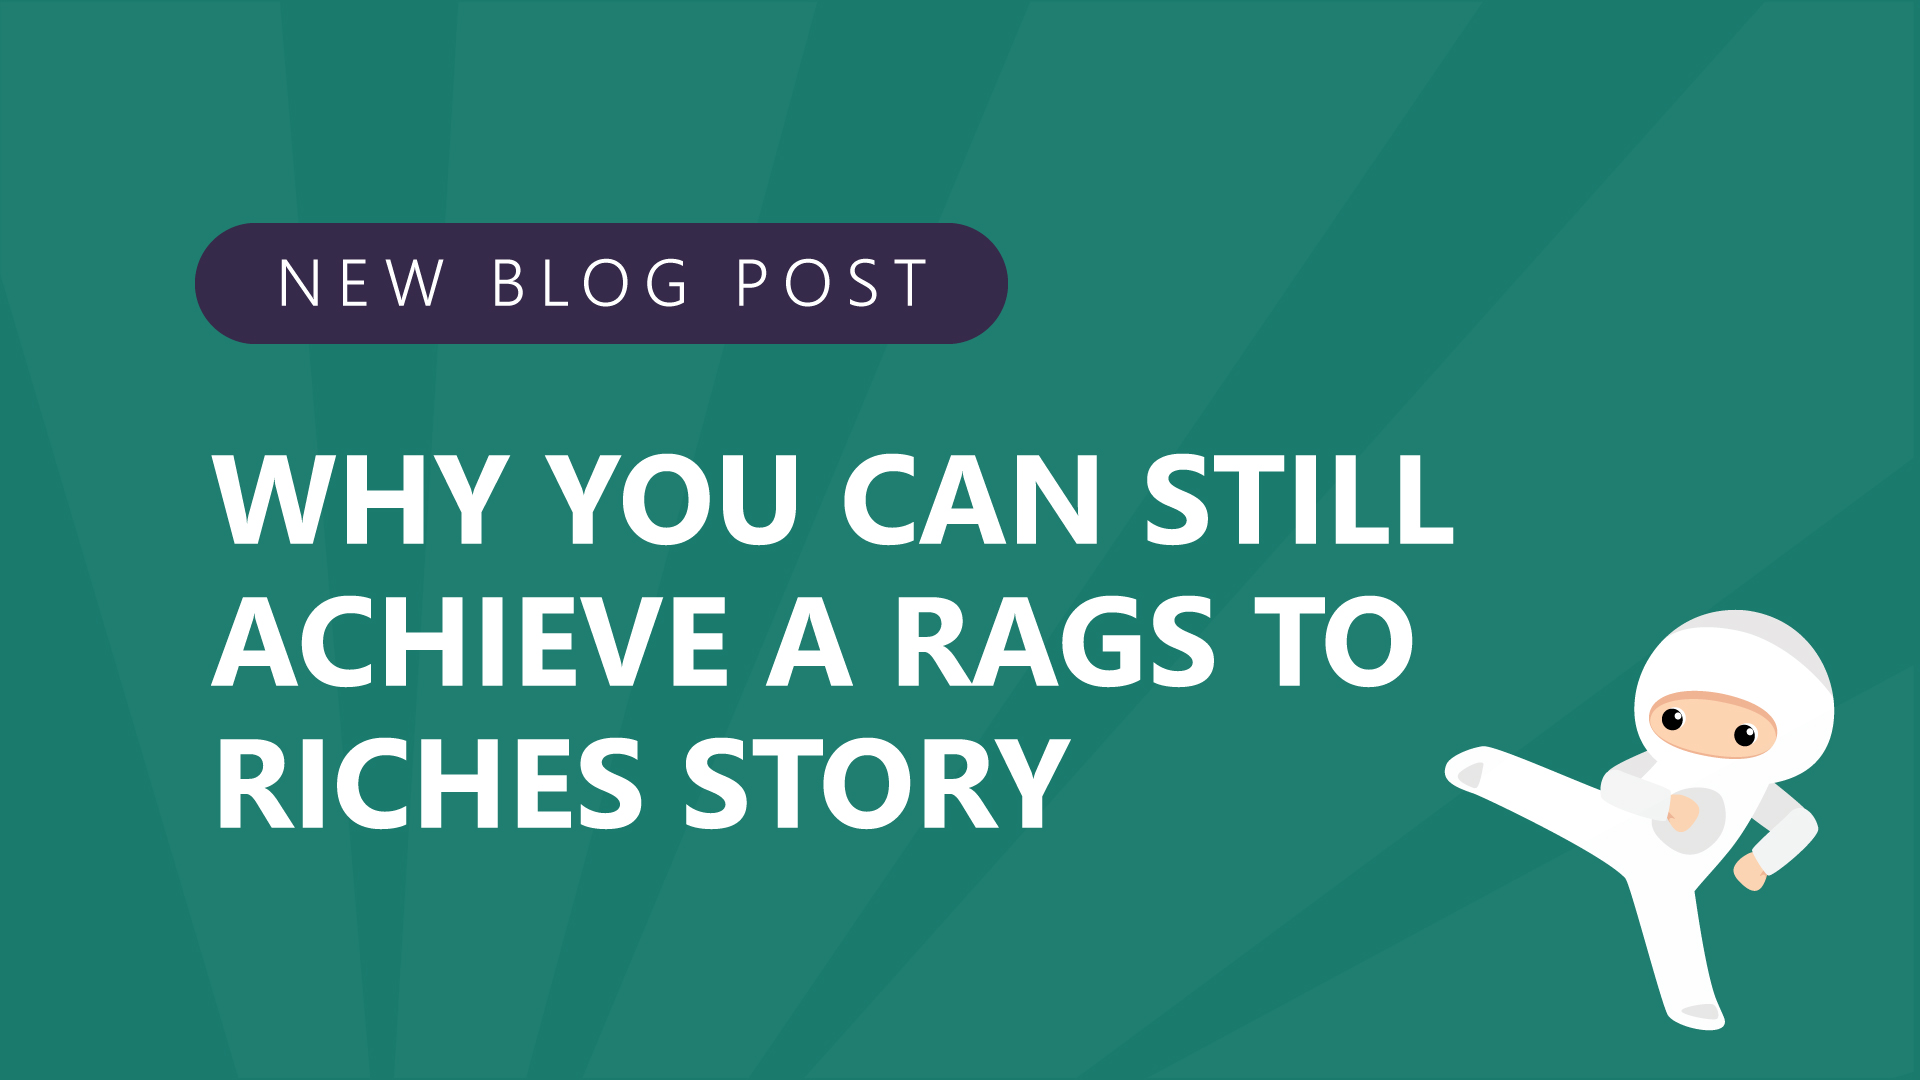 6-Why-You-Can-Still-Achieve-a-Rags-to-Riches-Story.jpg